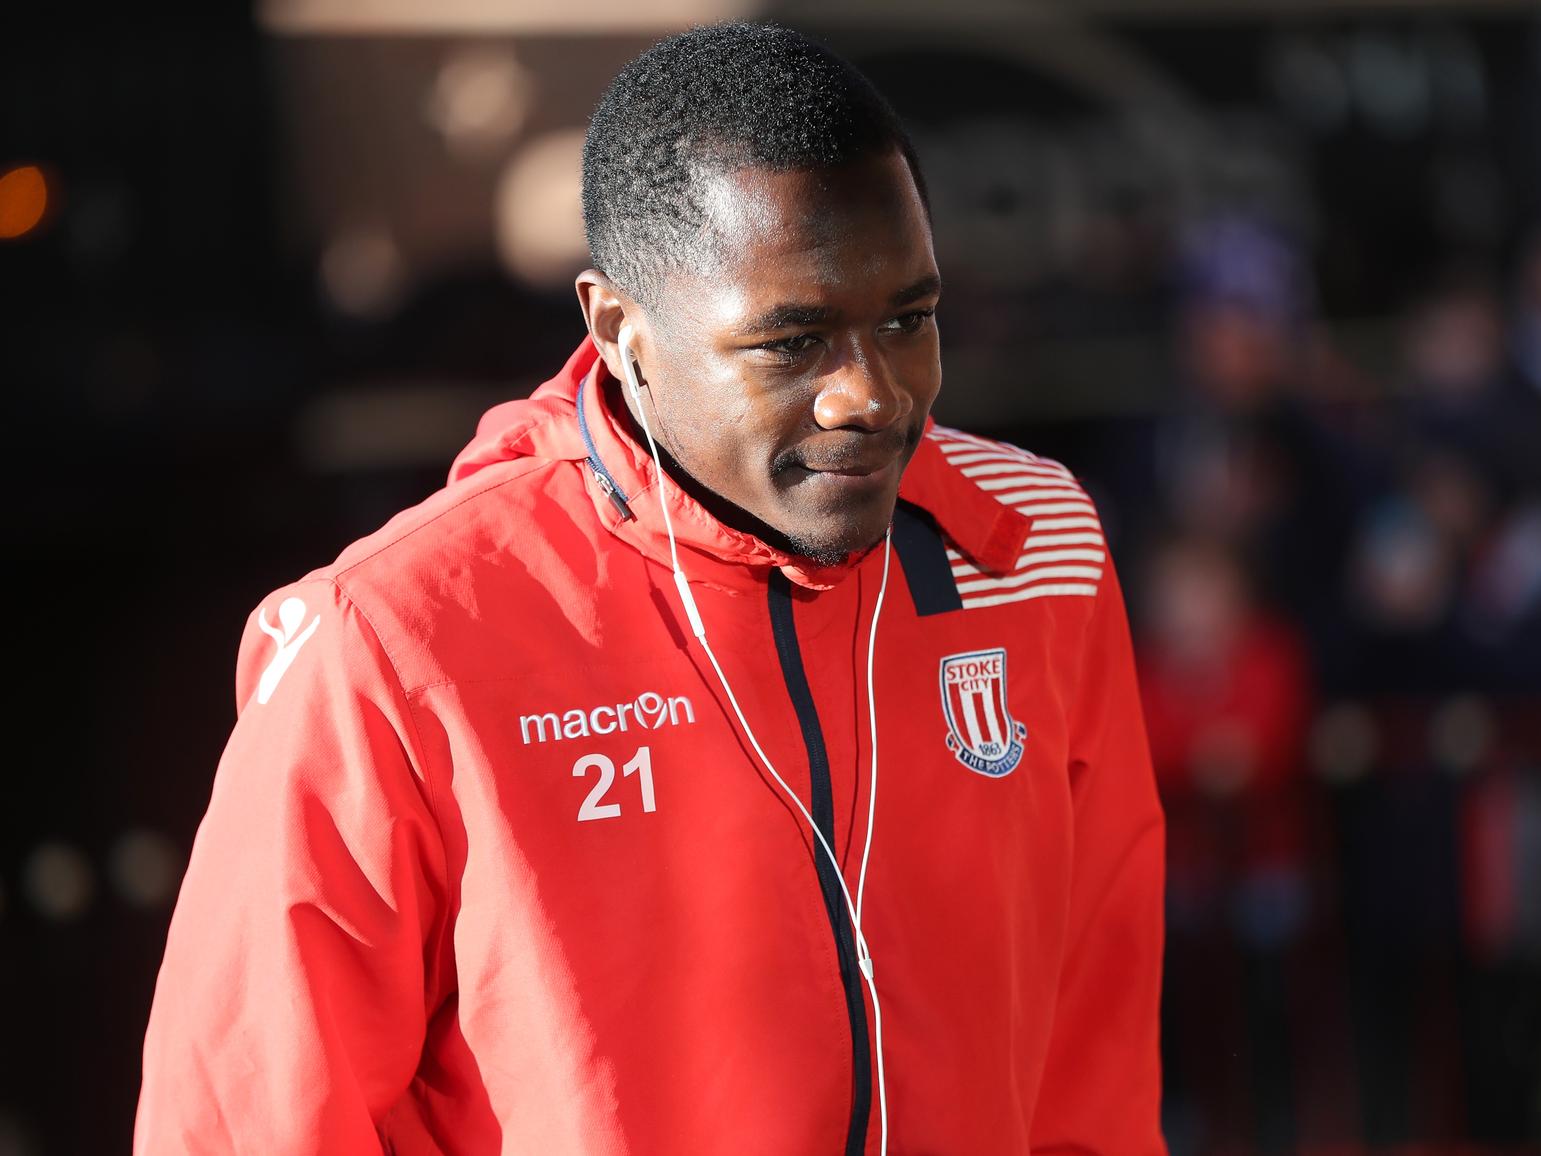 Stoke City midfielder Giannelli Imbula, who represented France as a youth player, has successfully changed international allegiances, and will now be able to represent DR Congo at senior level.